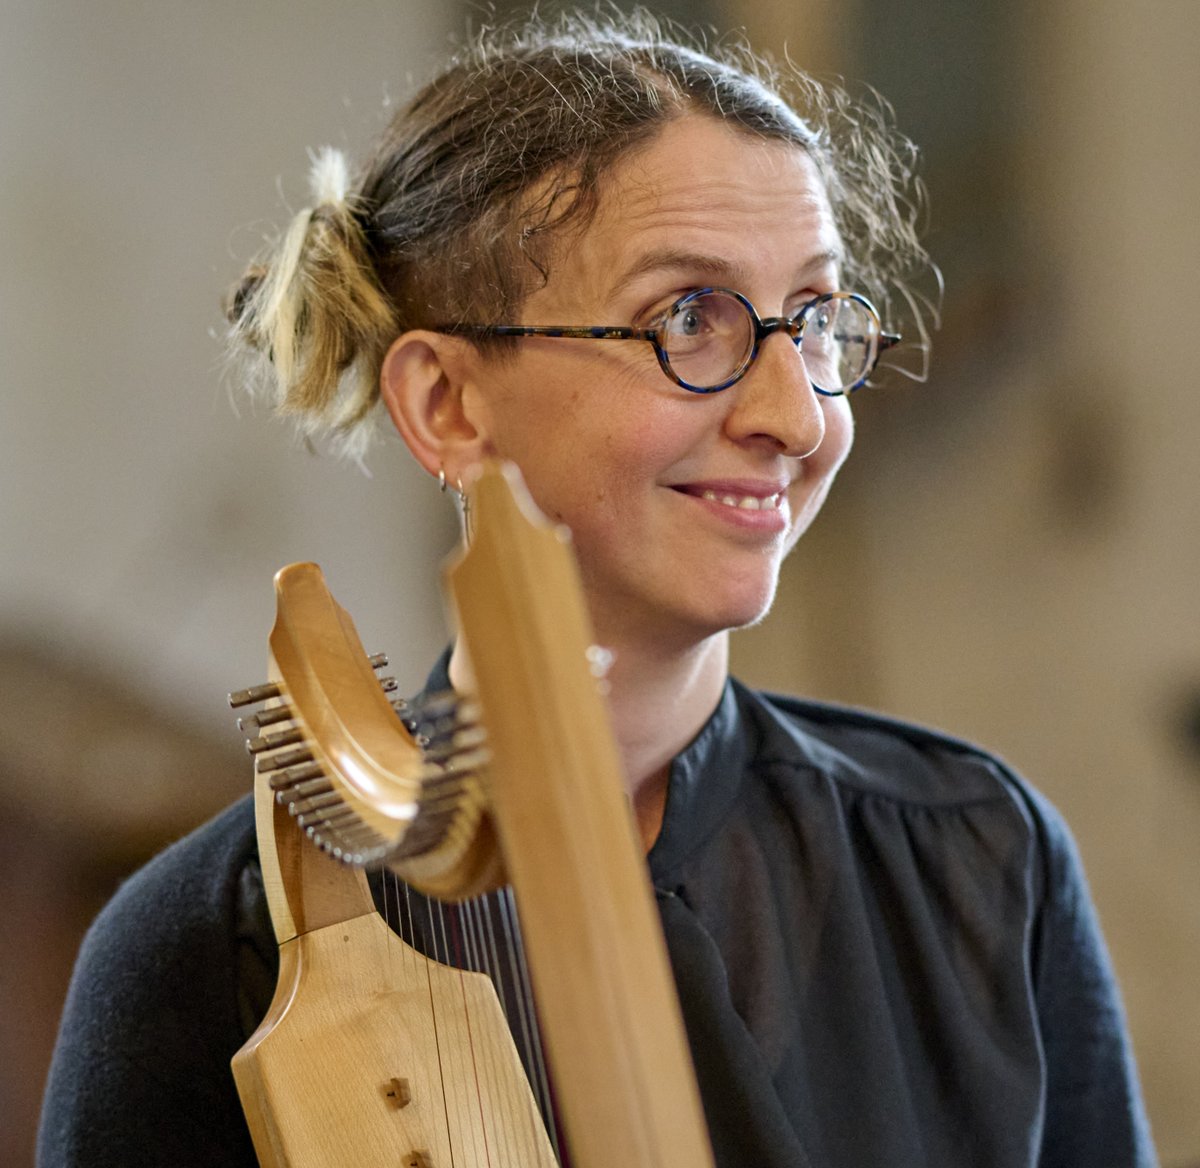 In 2023 we celebrate 650 years since visionary & mystic #MargeryKempe was born. Join Leah Stuttard on 3-5 April to learn about the music Kempe might've heard & explore how singing and walking can produce wellbeing now just as they did in centuries past...

hud.ac/otb